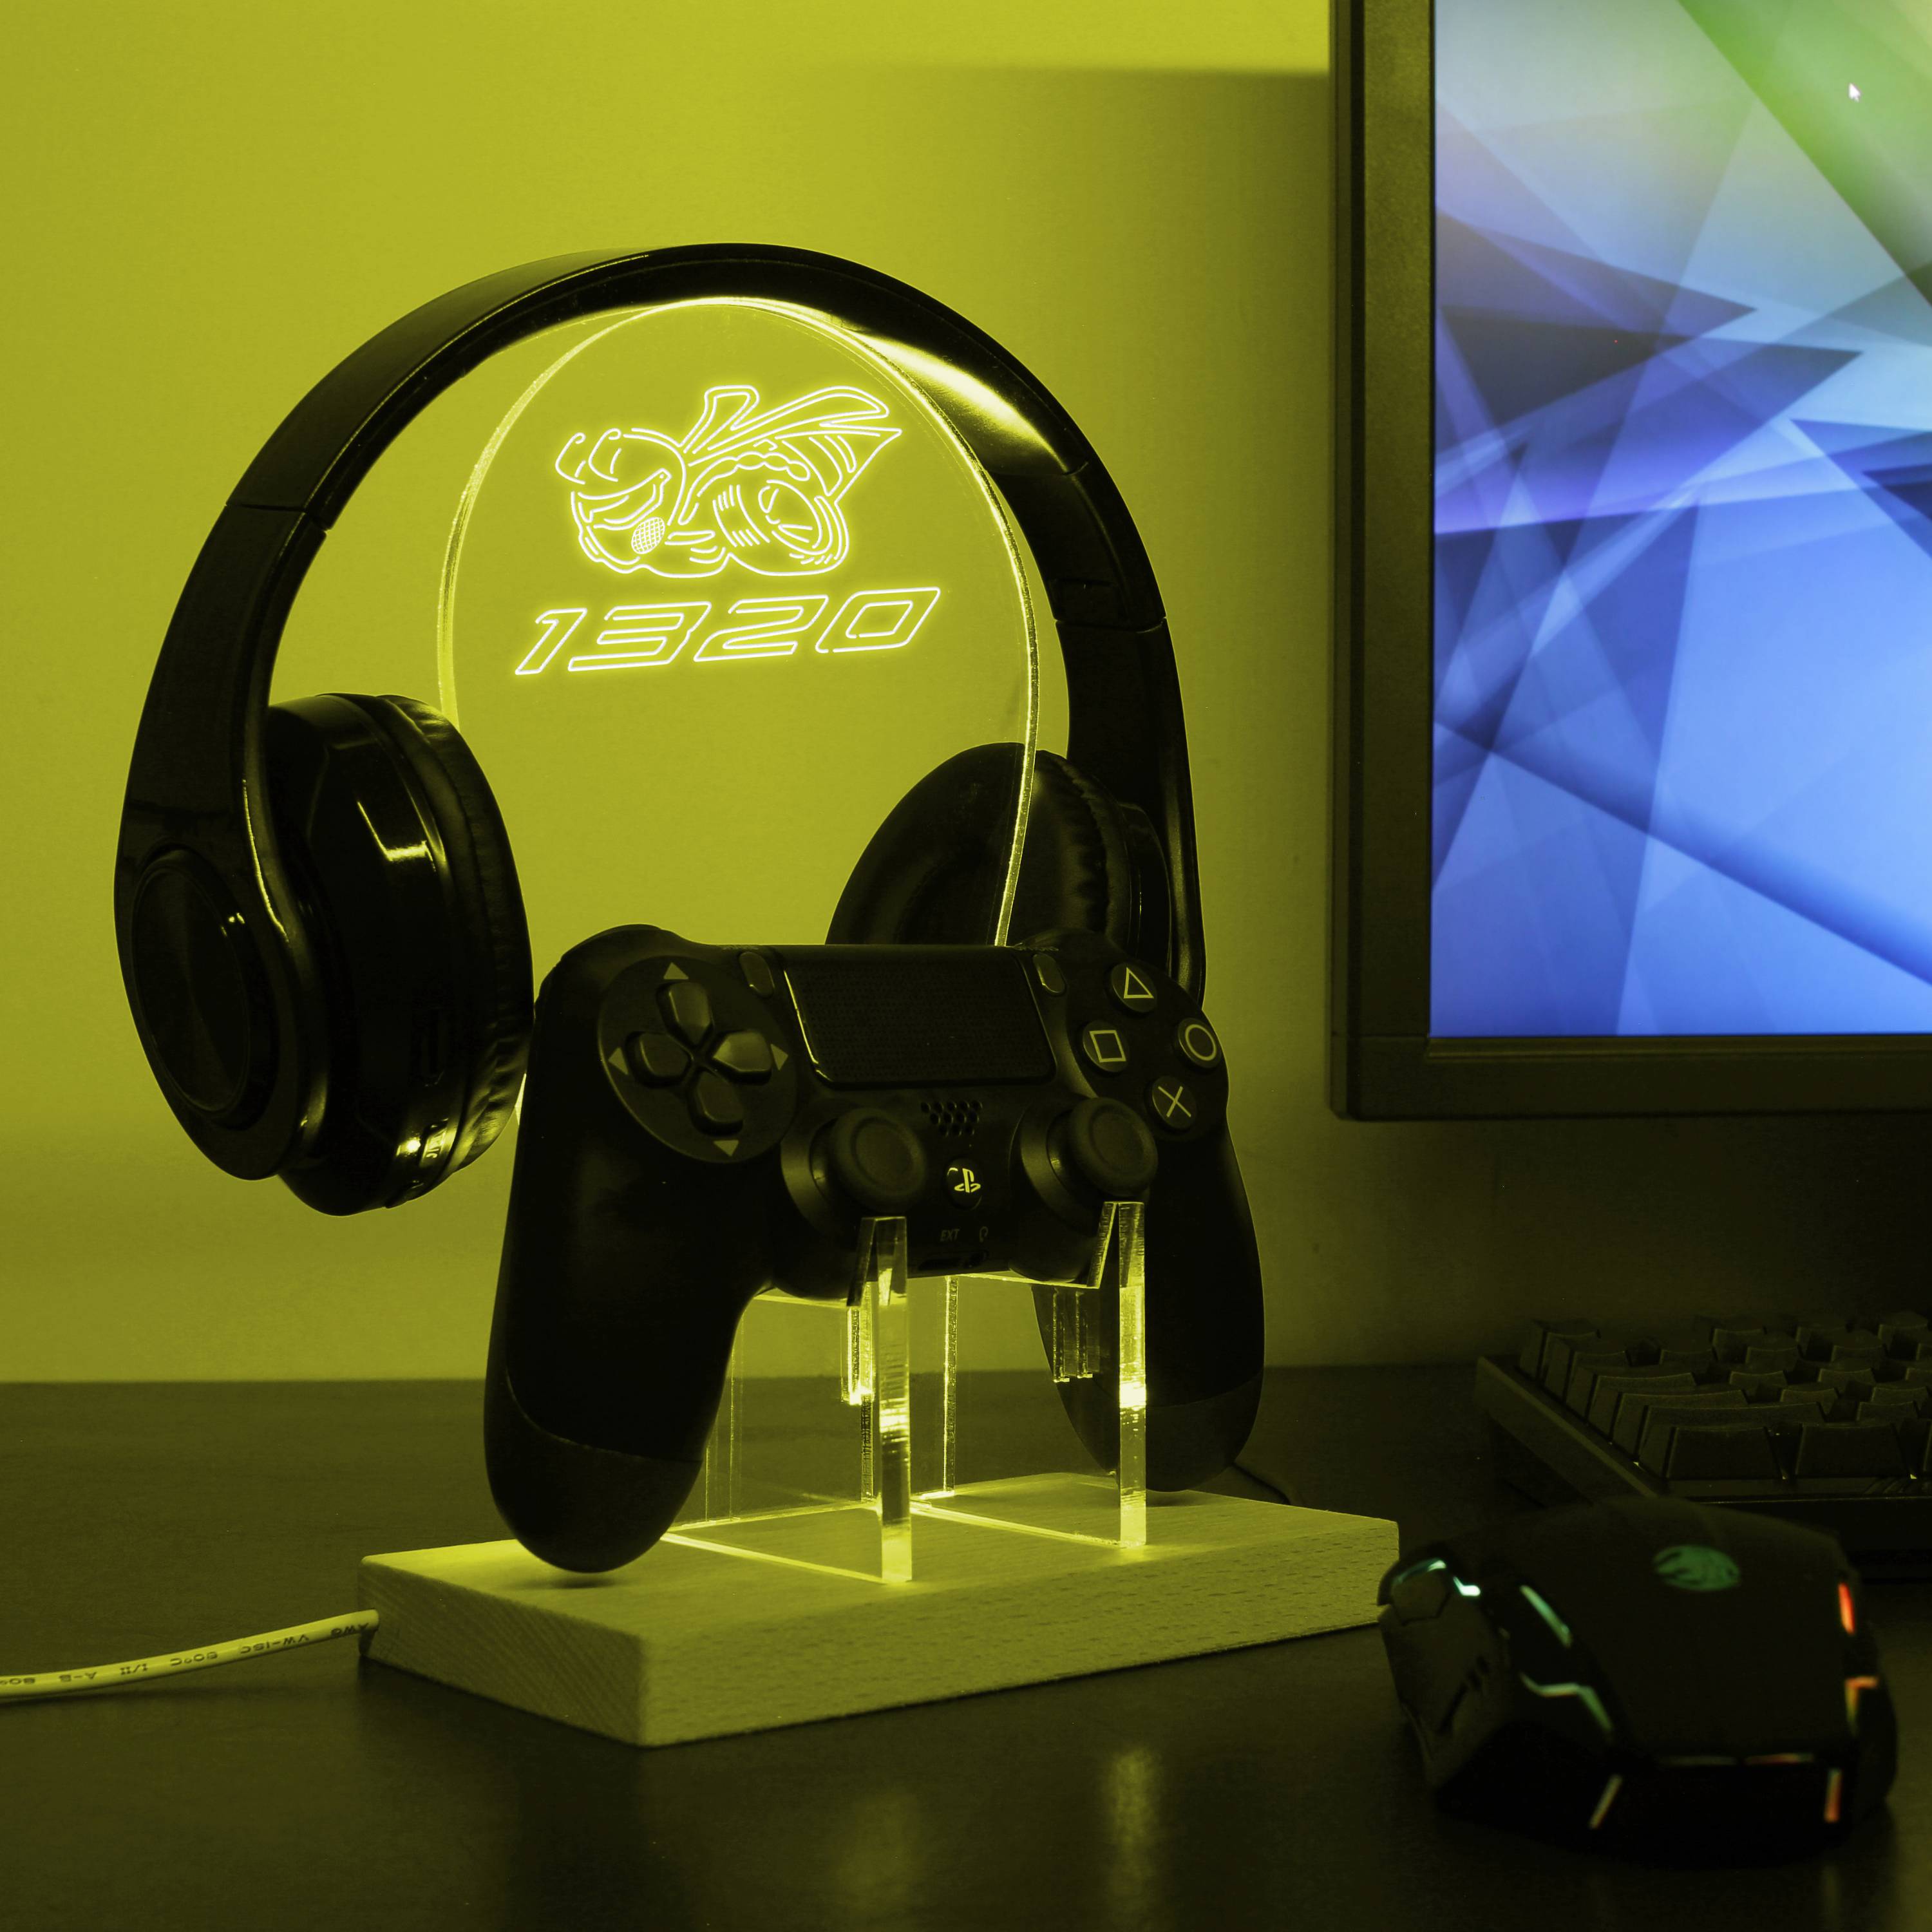 DG Angry Bee 1320 Super Bee LED Gaming Headset Controller Stand